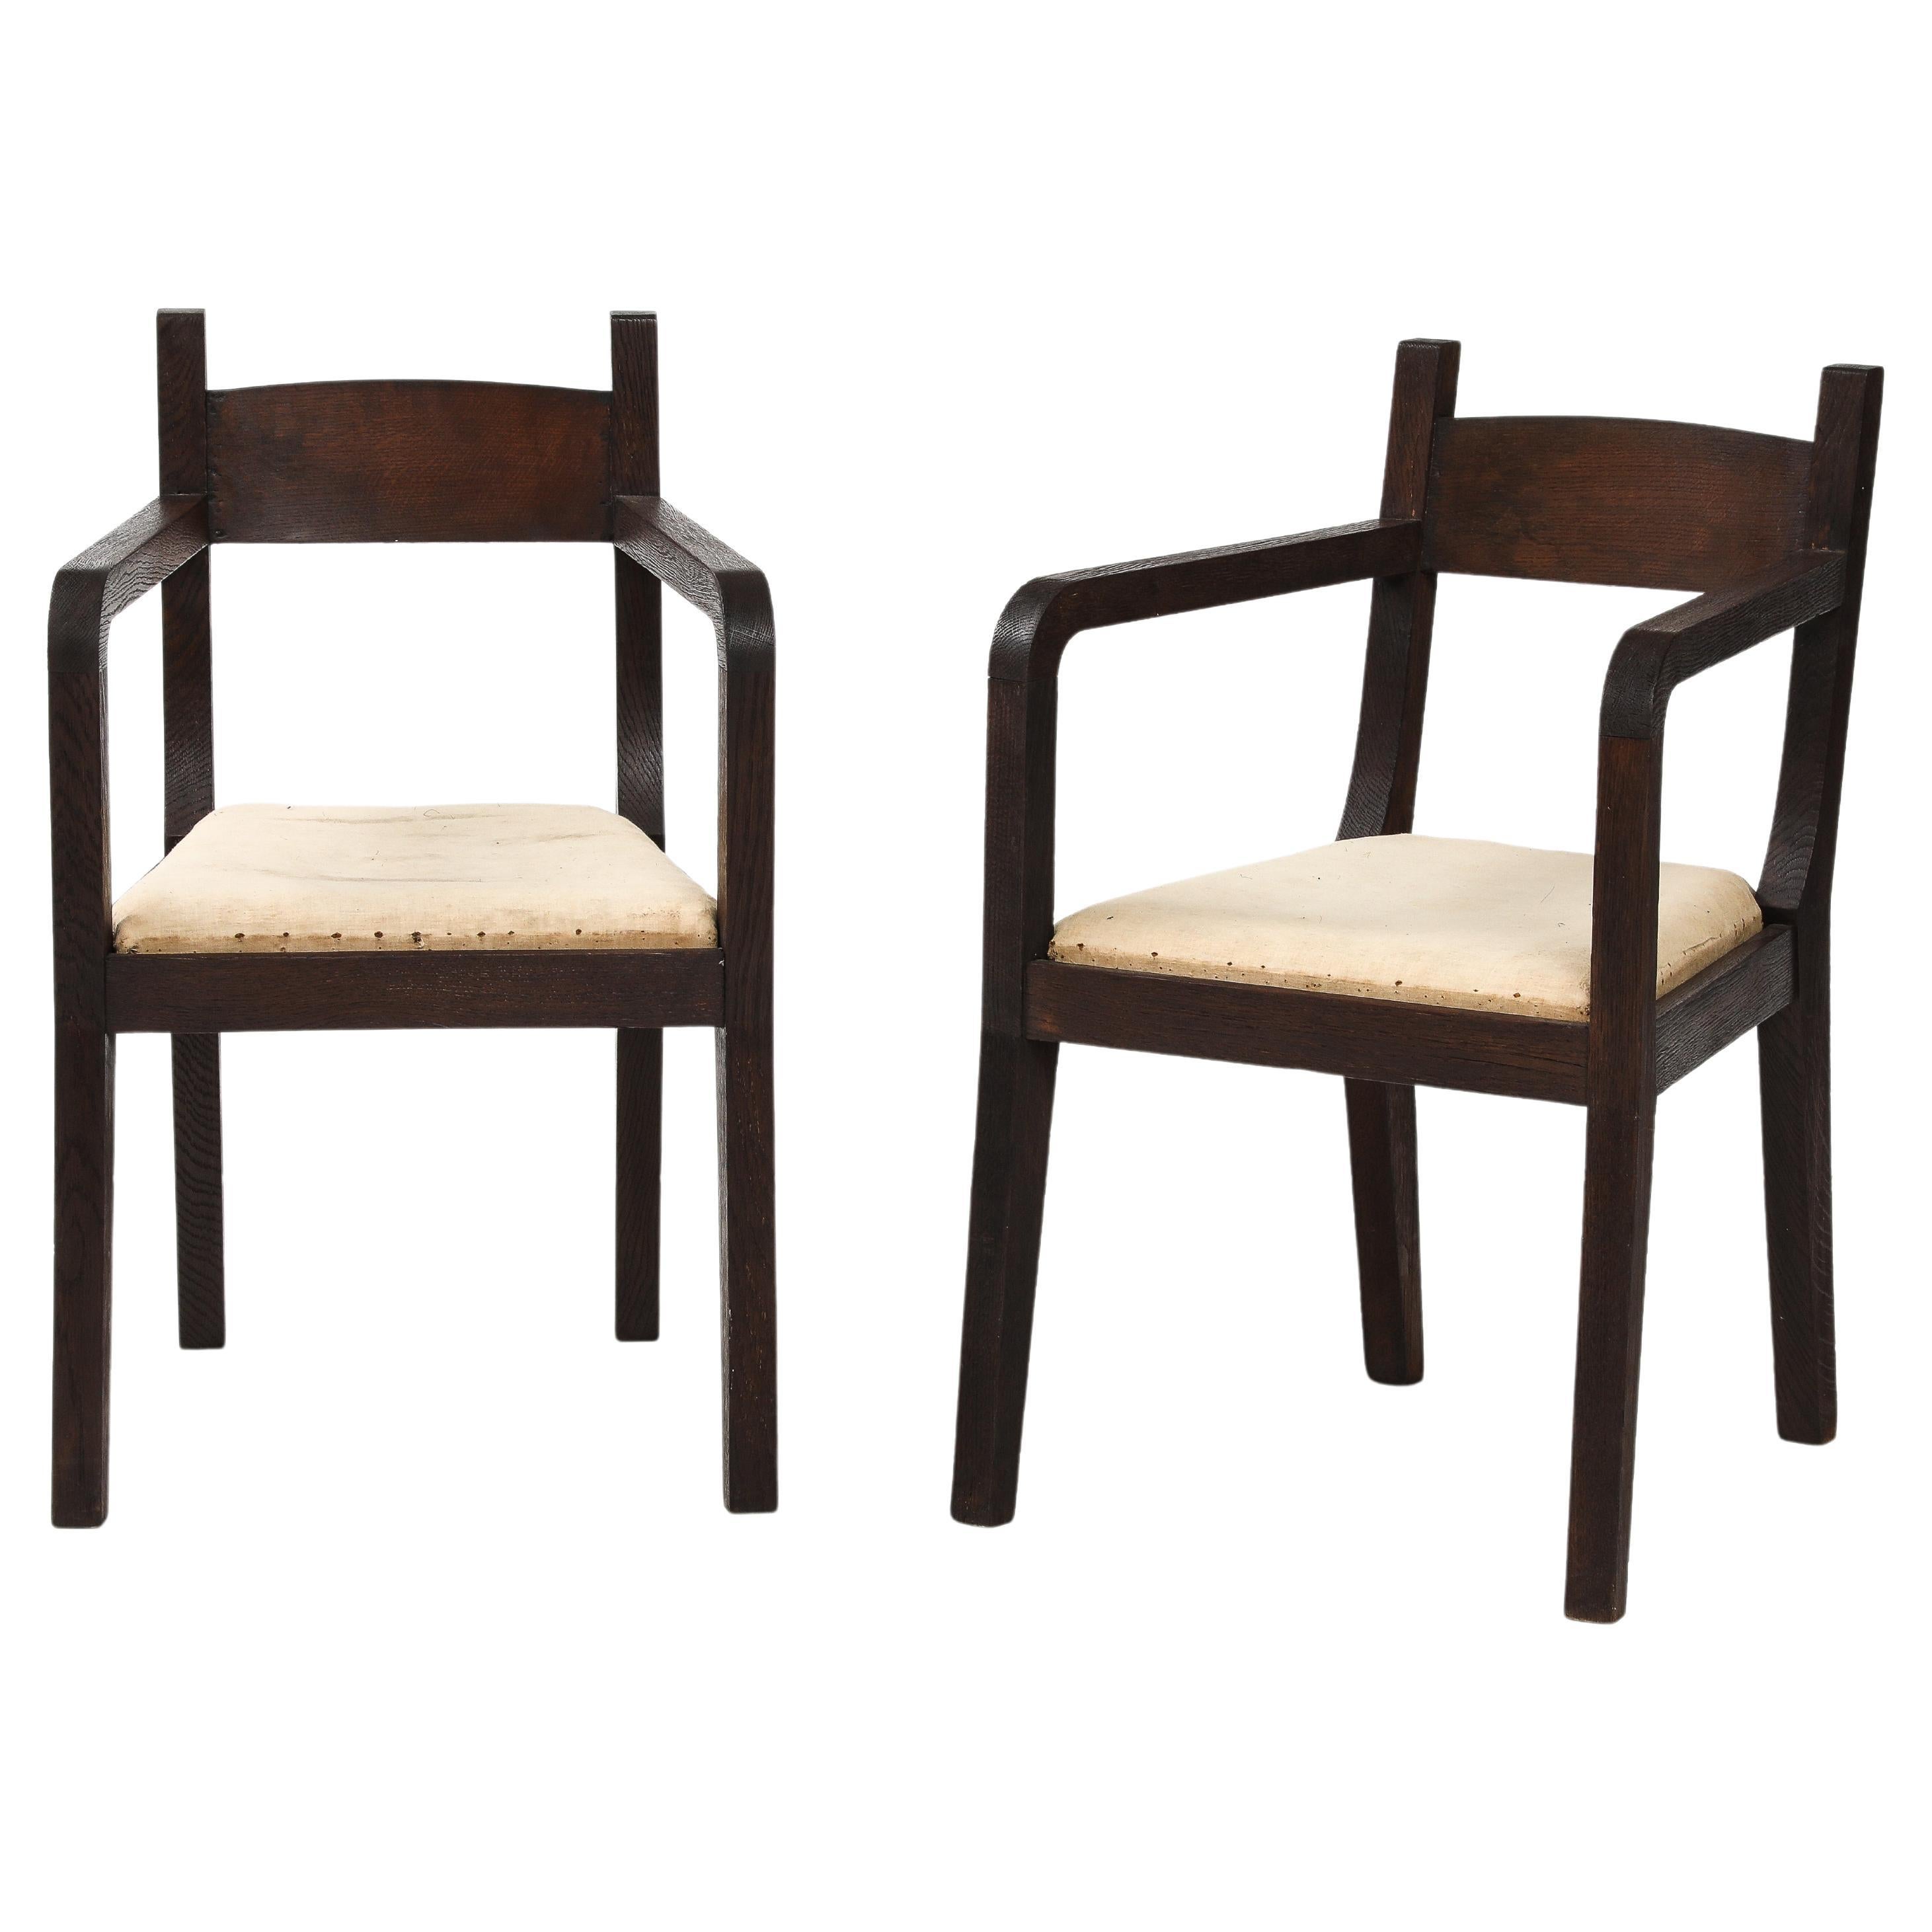 Pair of Modernist Eyre de Lanux Armchairs in Brushed Oak, France, c. 1925 For Sale